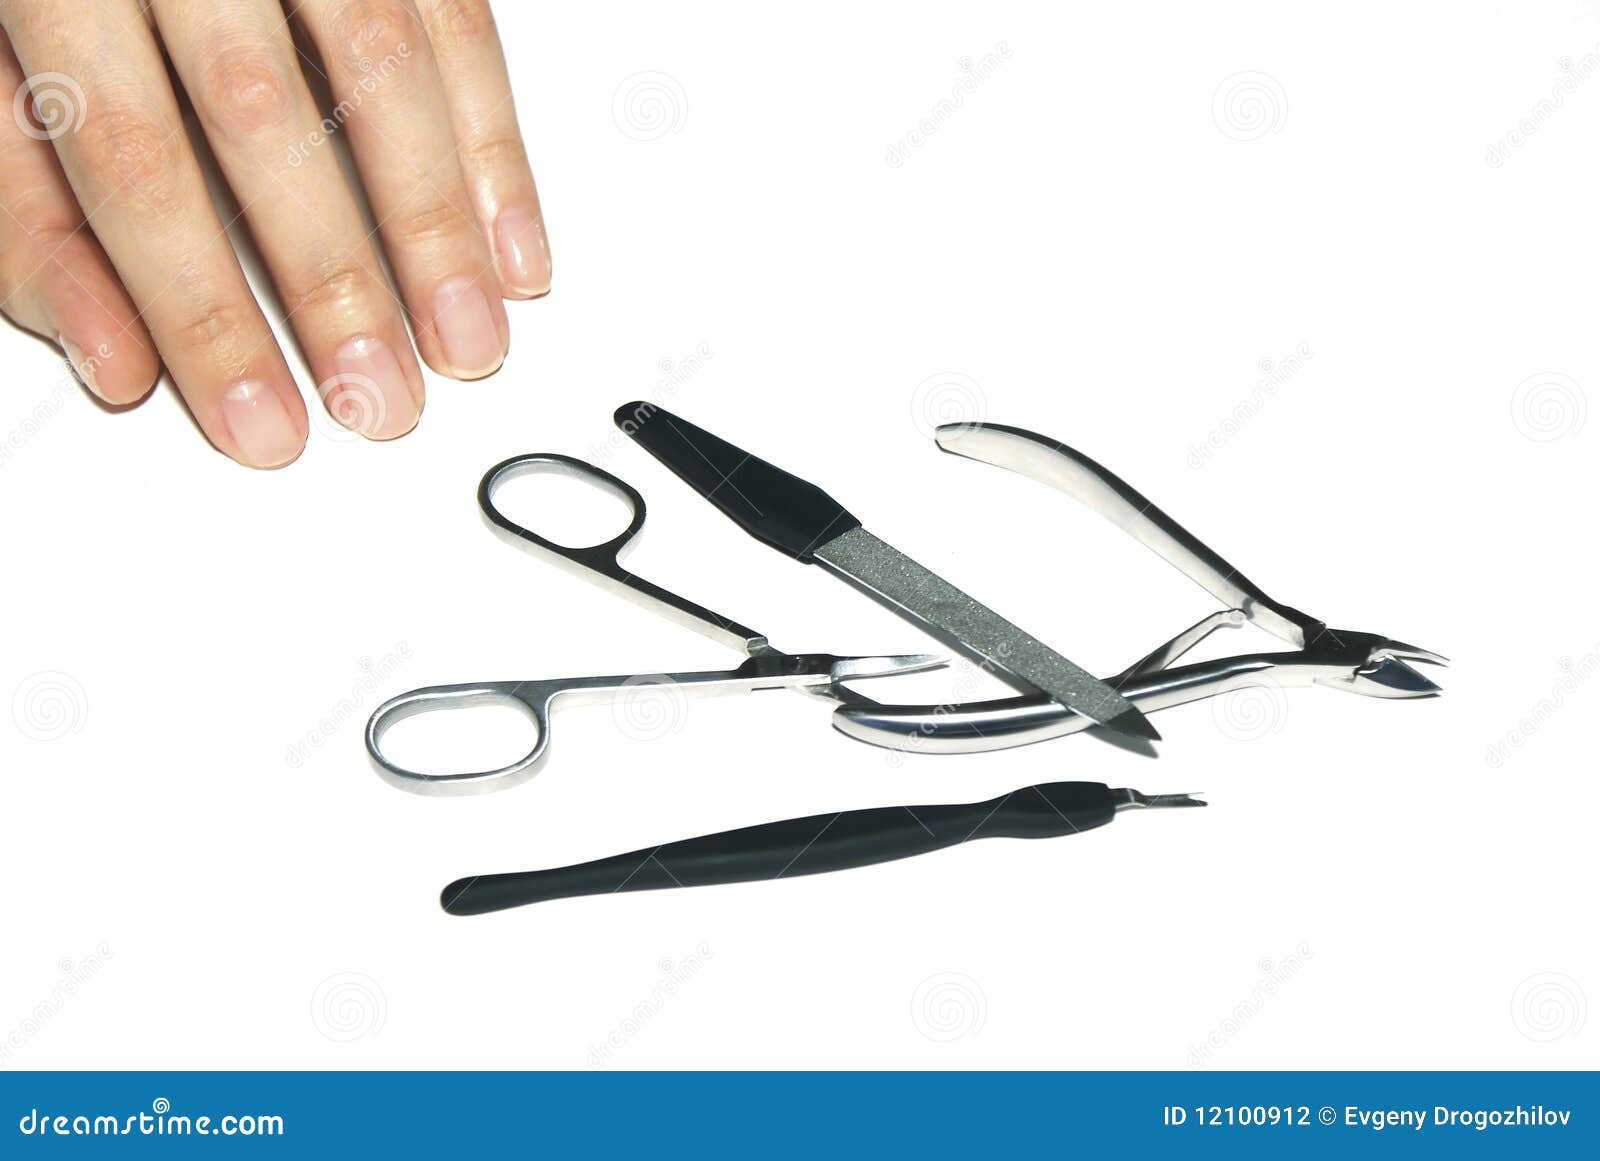 Tools for manicure stock photo. Image of accuracy, female - 12100912